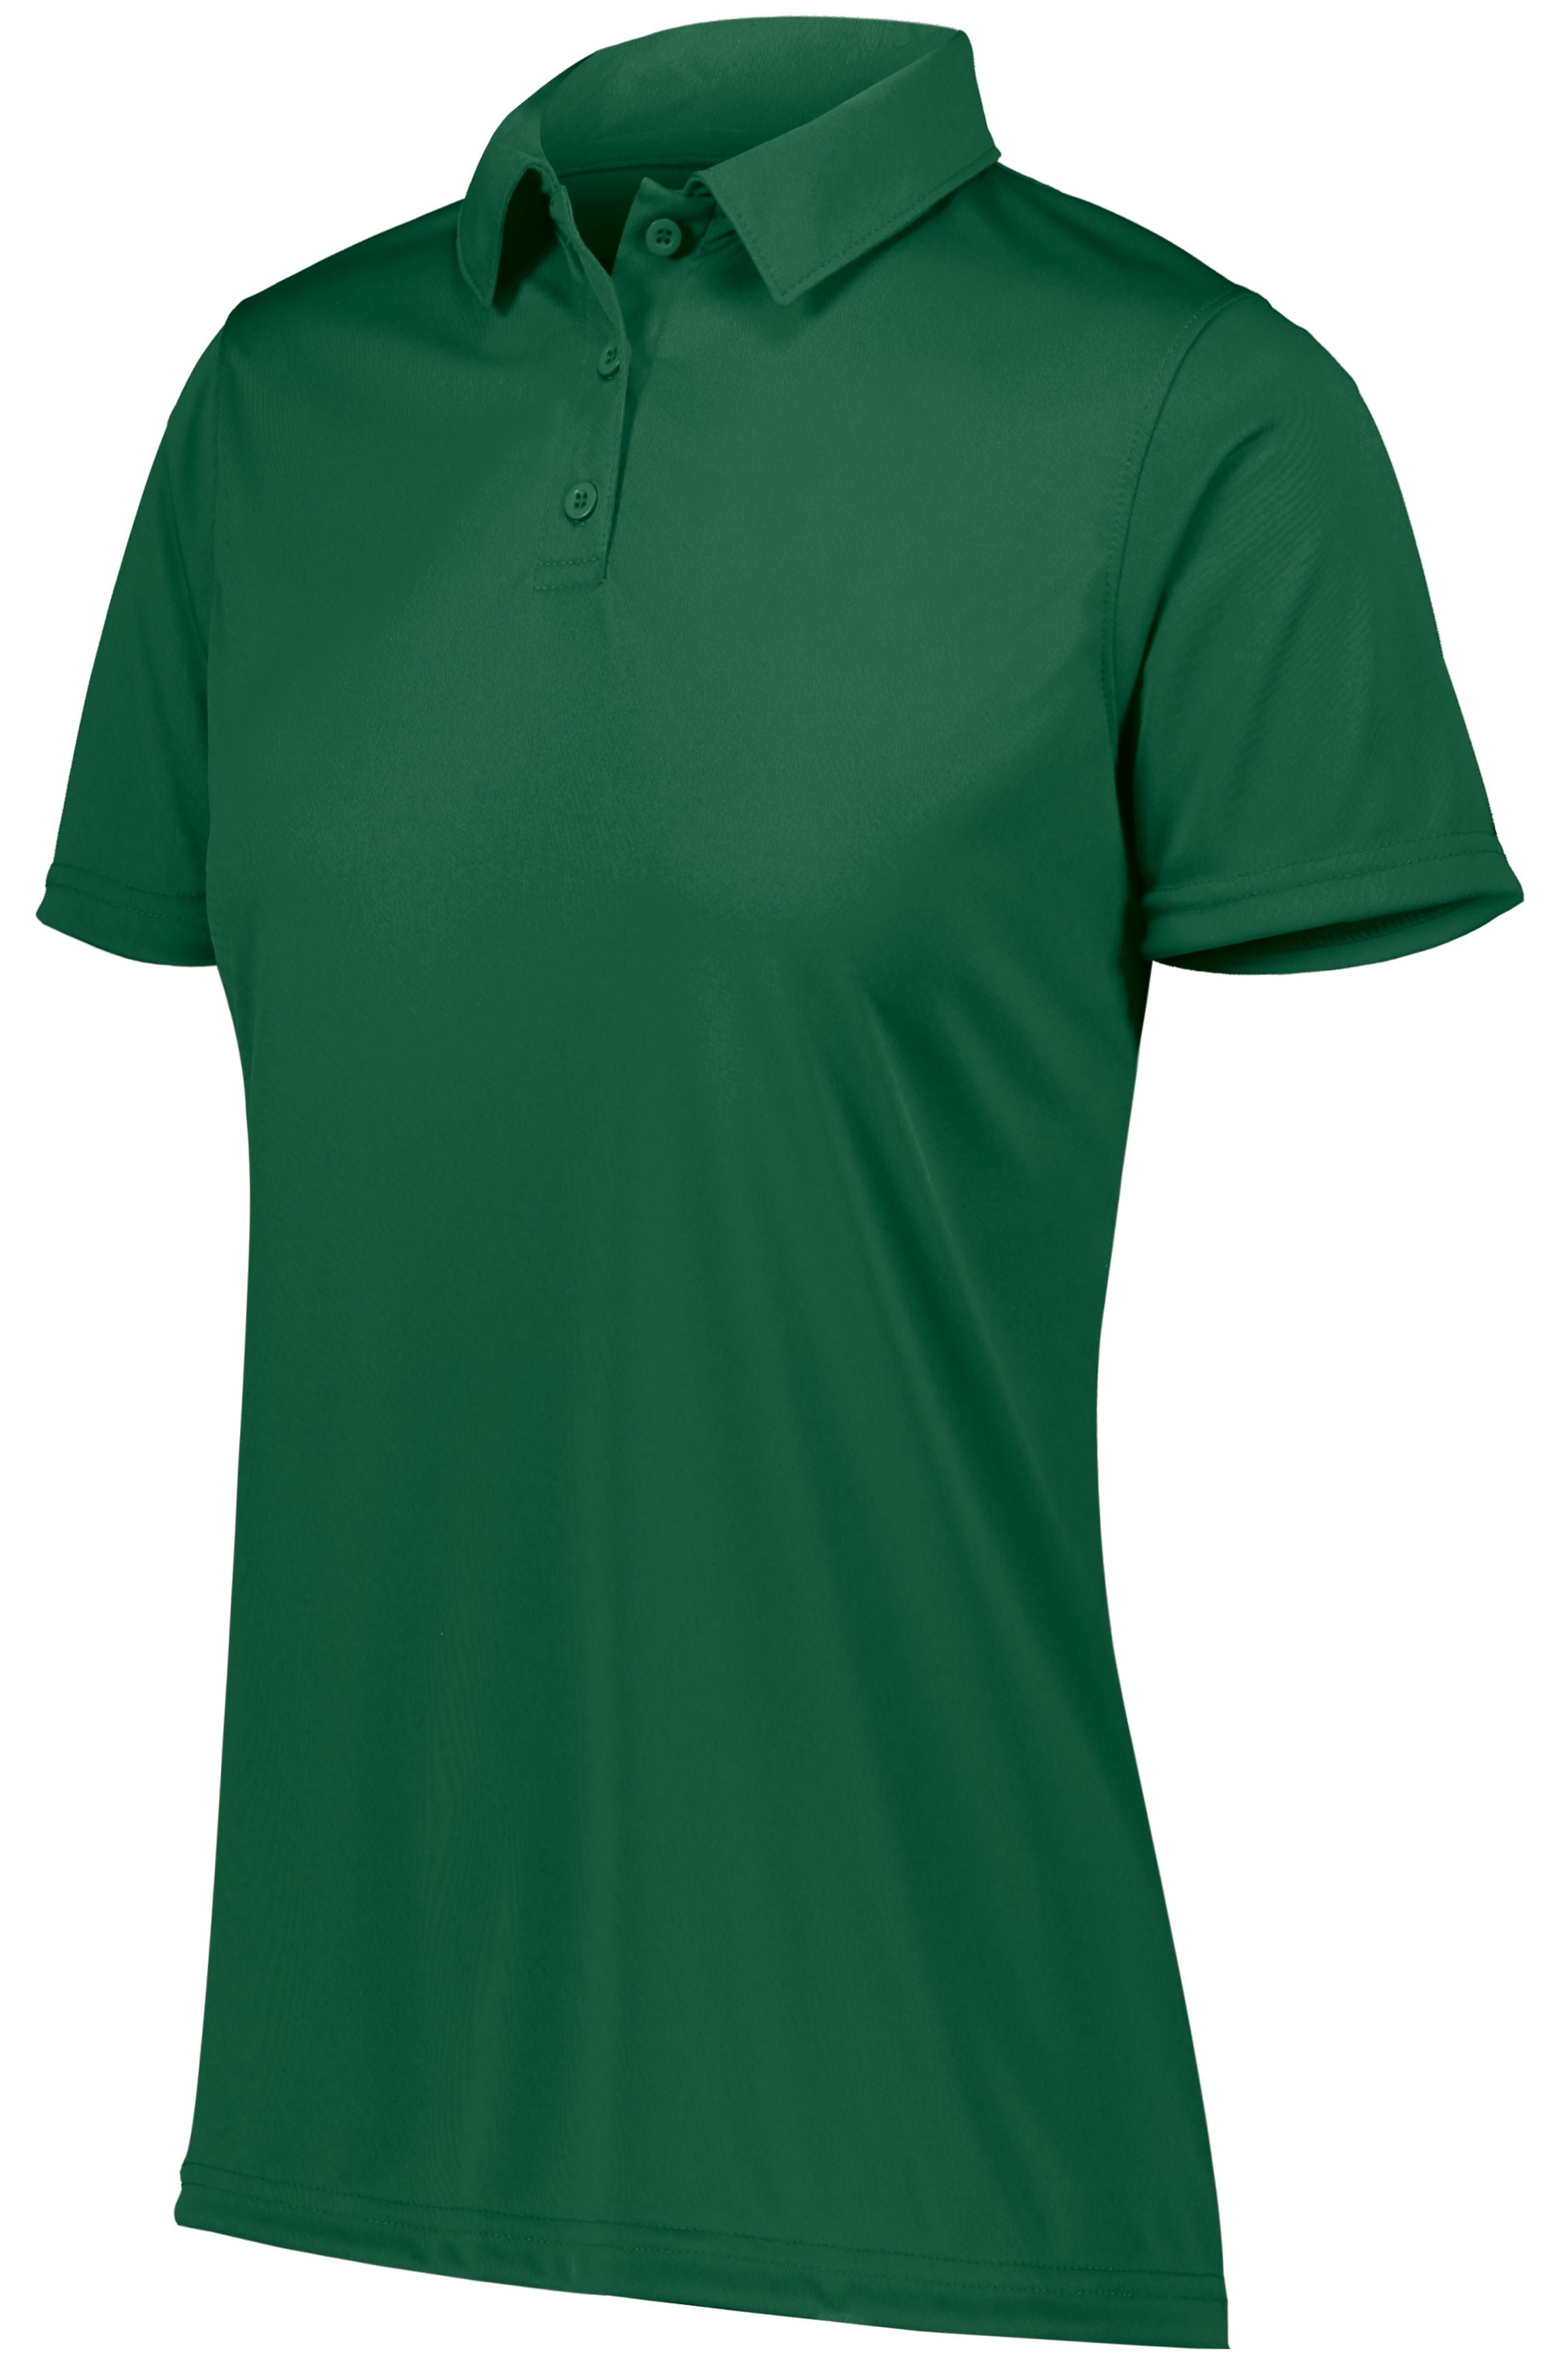 Augusta Sportswear Ladies Vital Polo in Dark Green  -Part of the Ladies, Ladies-Polo, Polos, Augusta-Products, Shirts product lines at KanaleyCreations.com